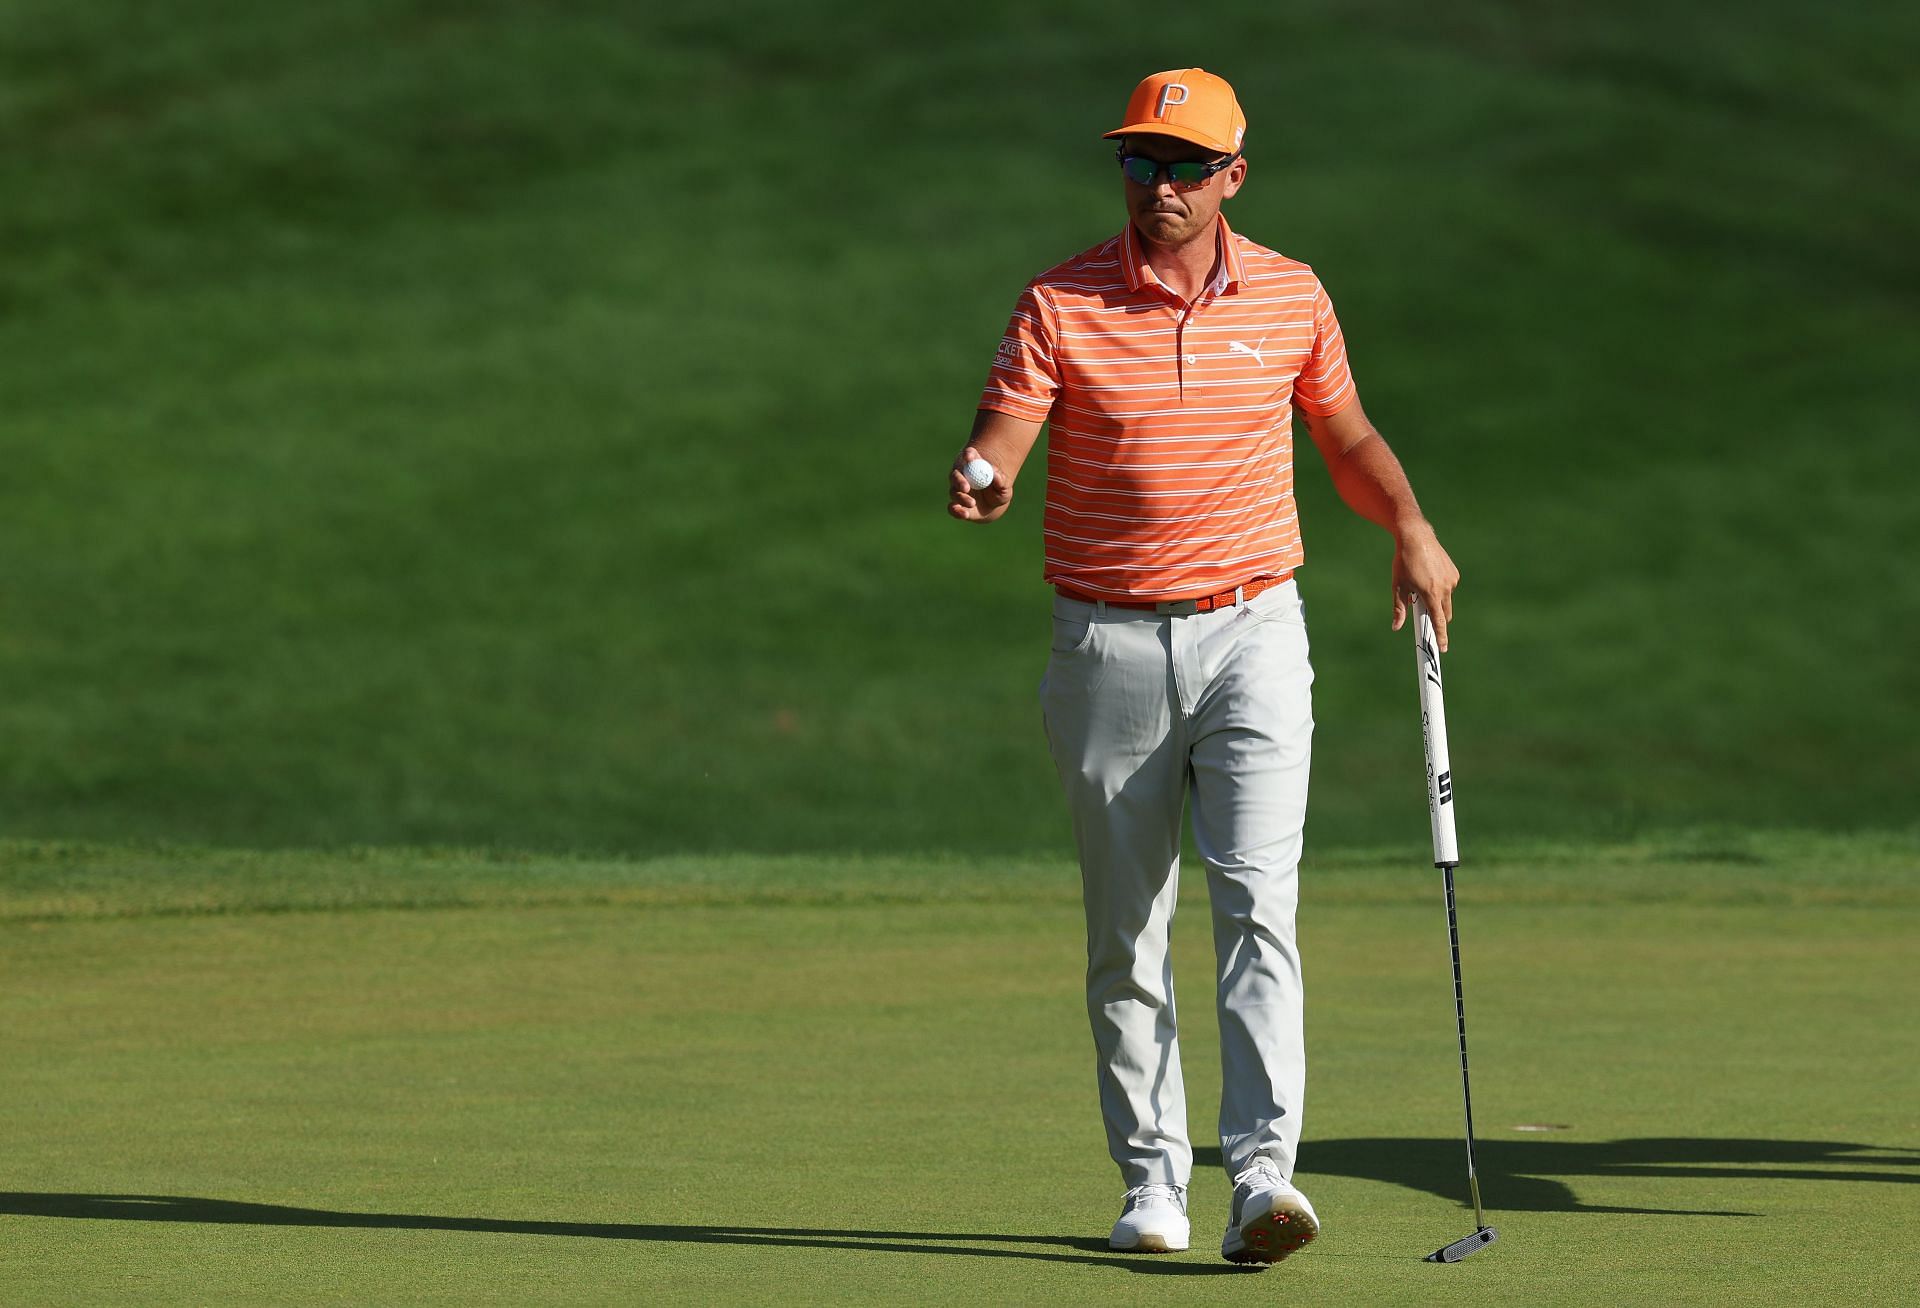 Rickie Fowler did well at the Travelers Championship